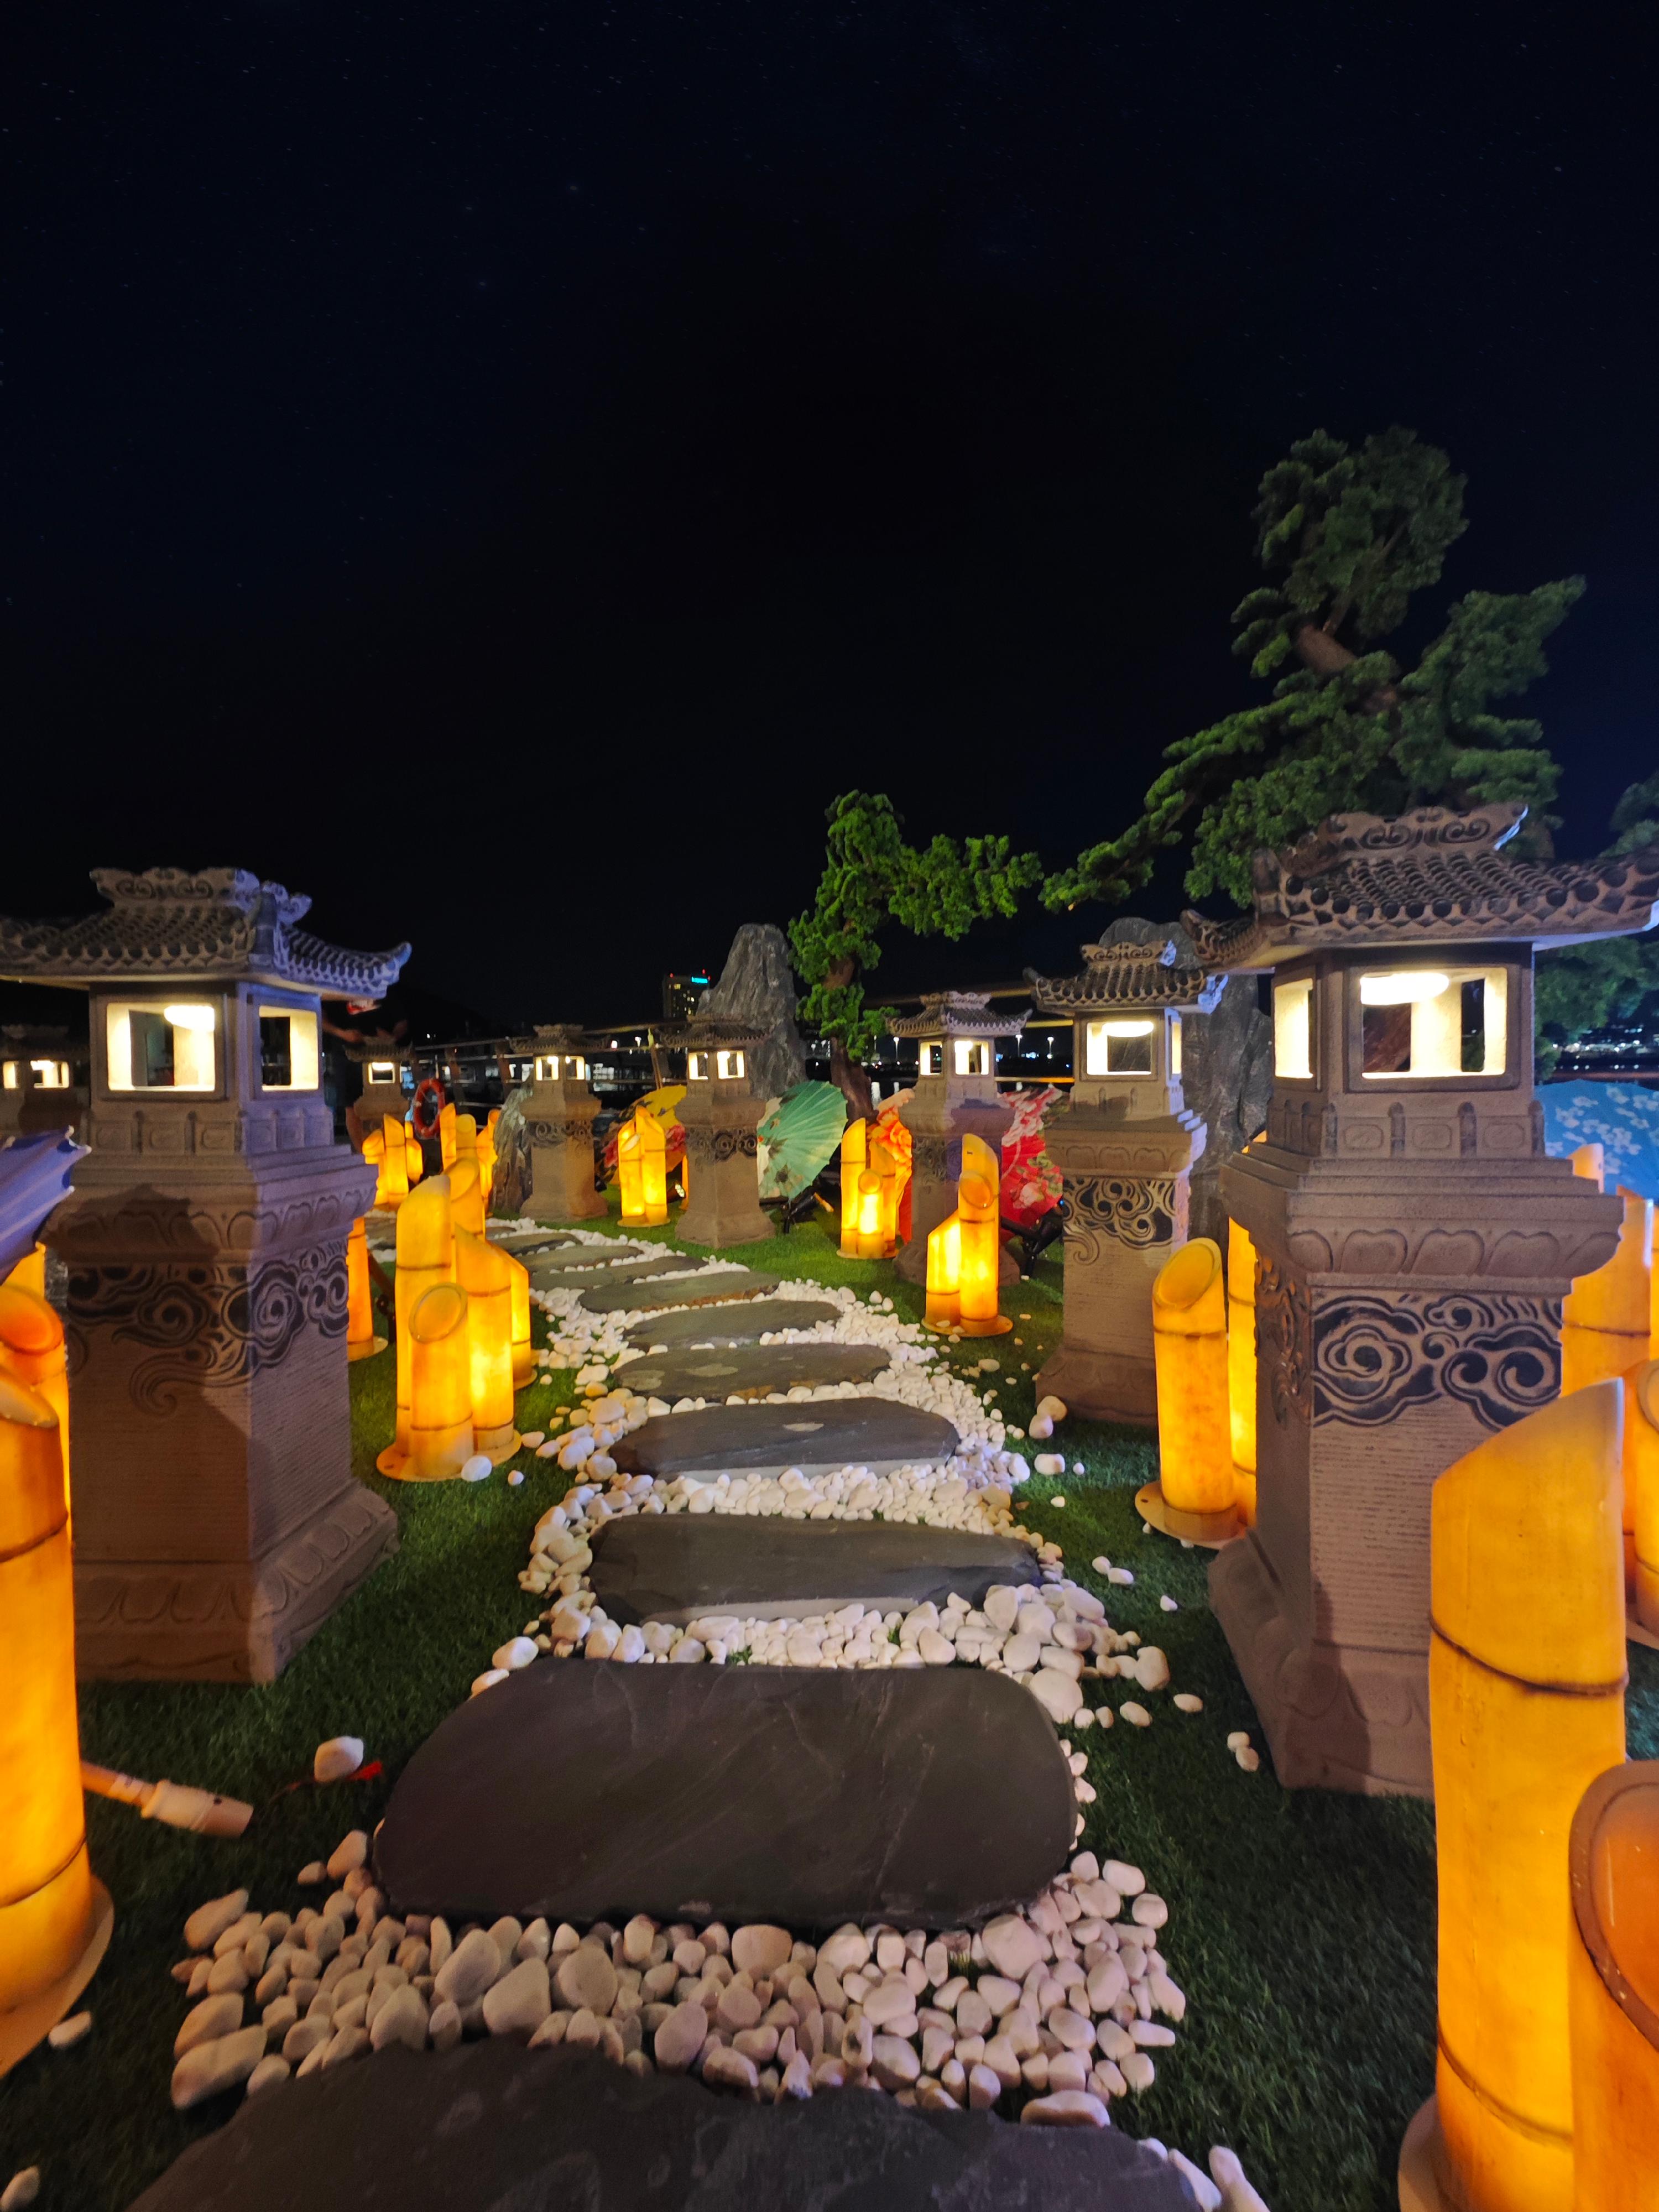 The Sustainable Lantau Office under the Civil Engineering and Development Department and the Islands District Office will organise the Happy Moon Lantern Festival at Tung Chung East Promenade from tomorrow (September 23) to October 8. Photo shows the "bamboo garden".